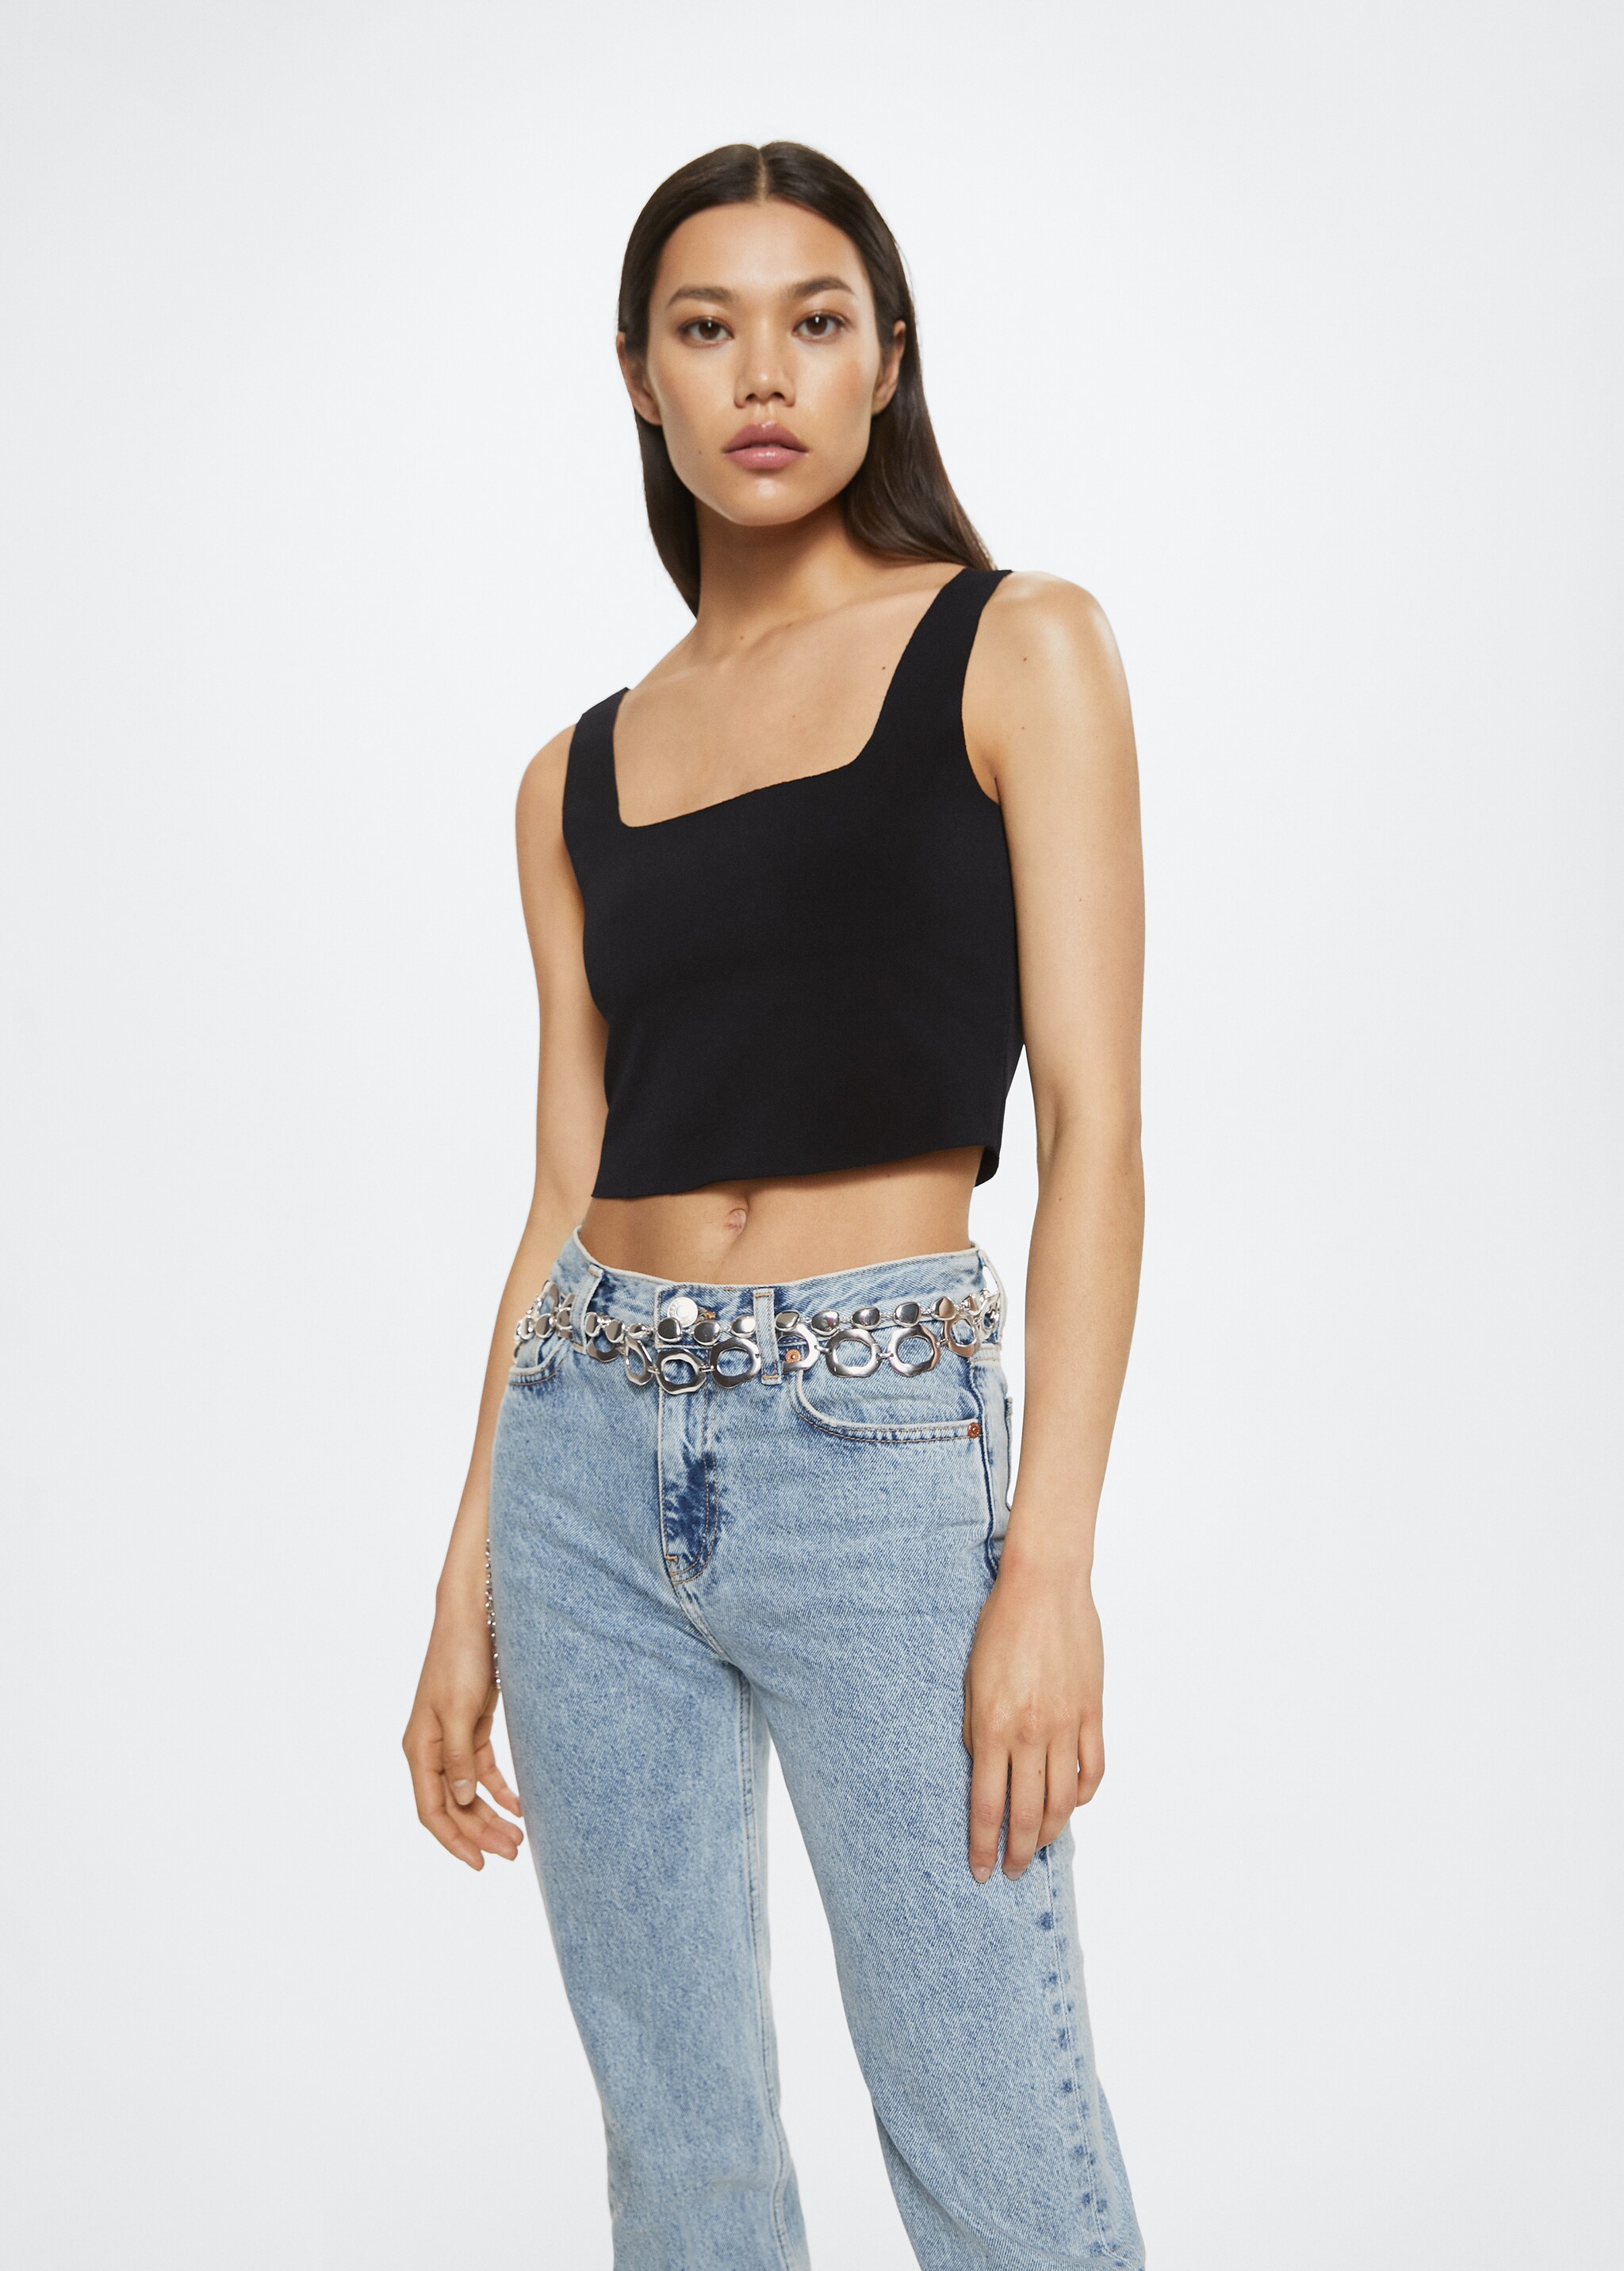 Knitted cropped top - Medium plane